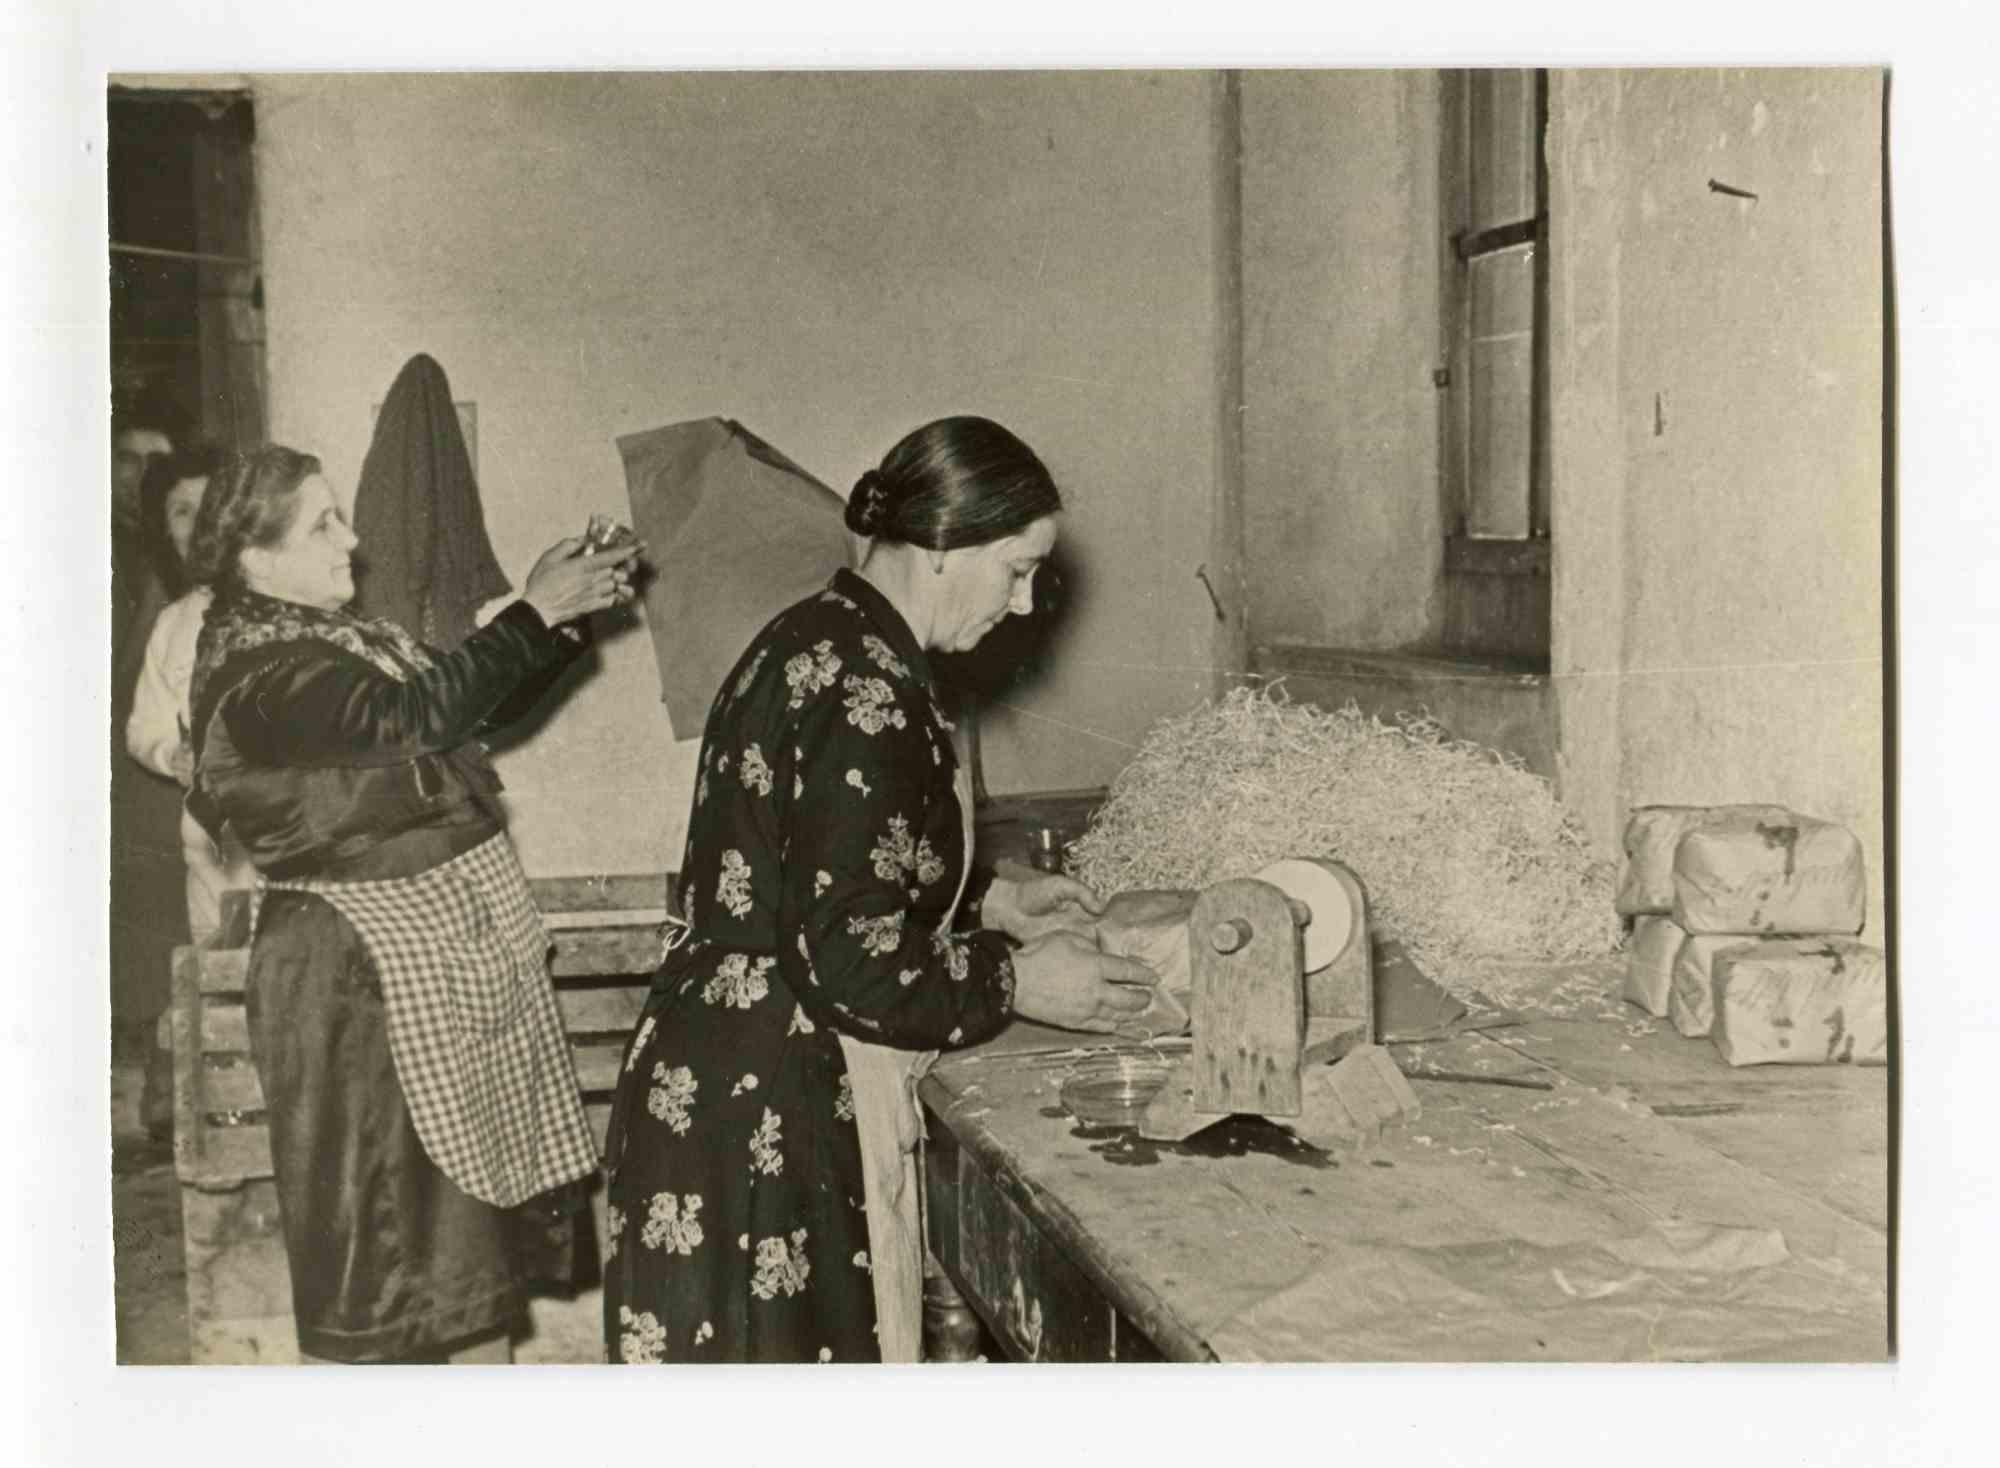 Unknown Portrait Photograph - Women at Work - Vintage Photograph About Women Rights - 1950s